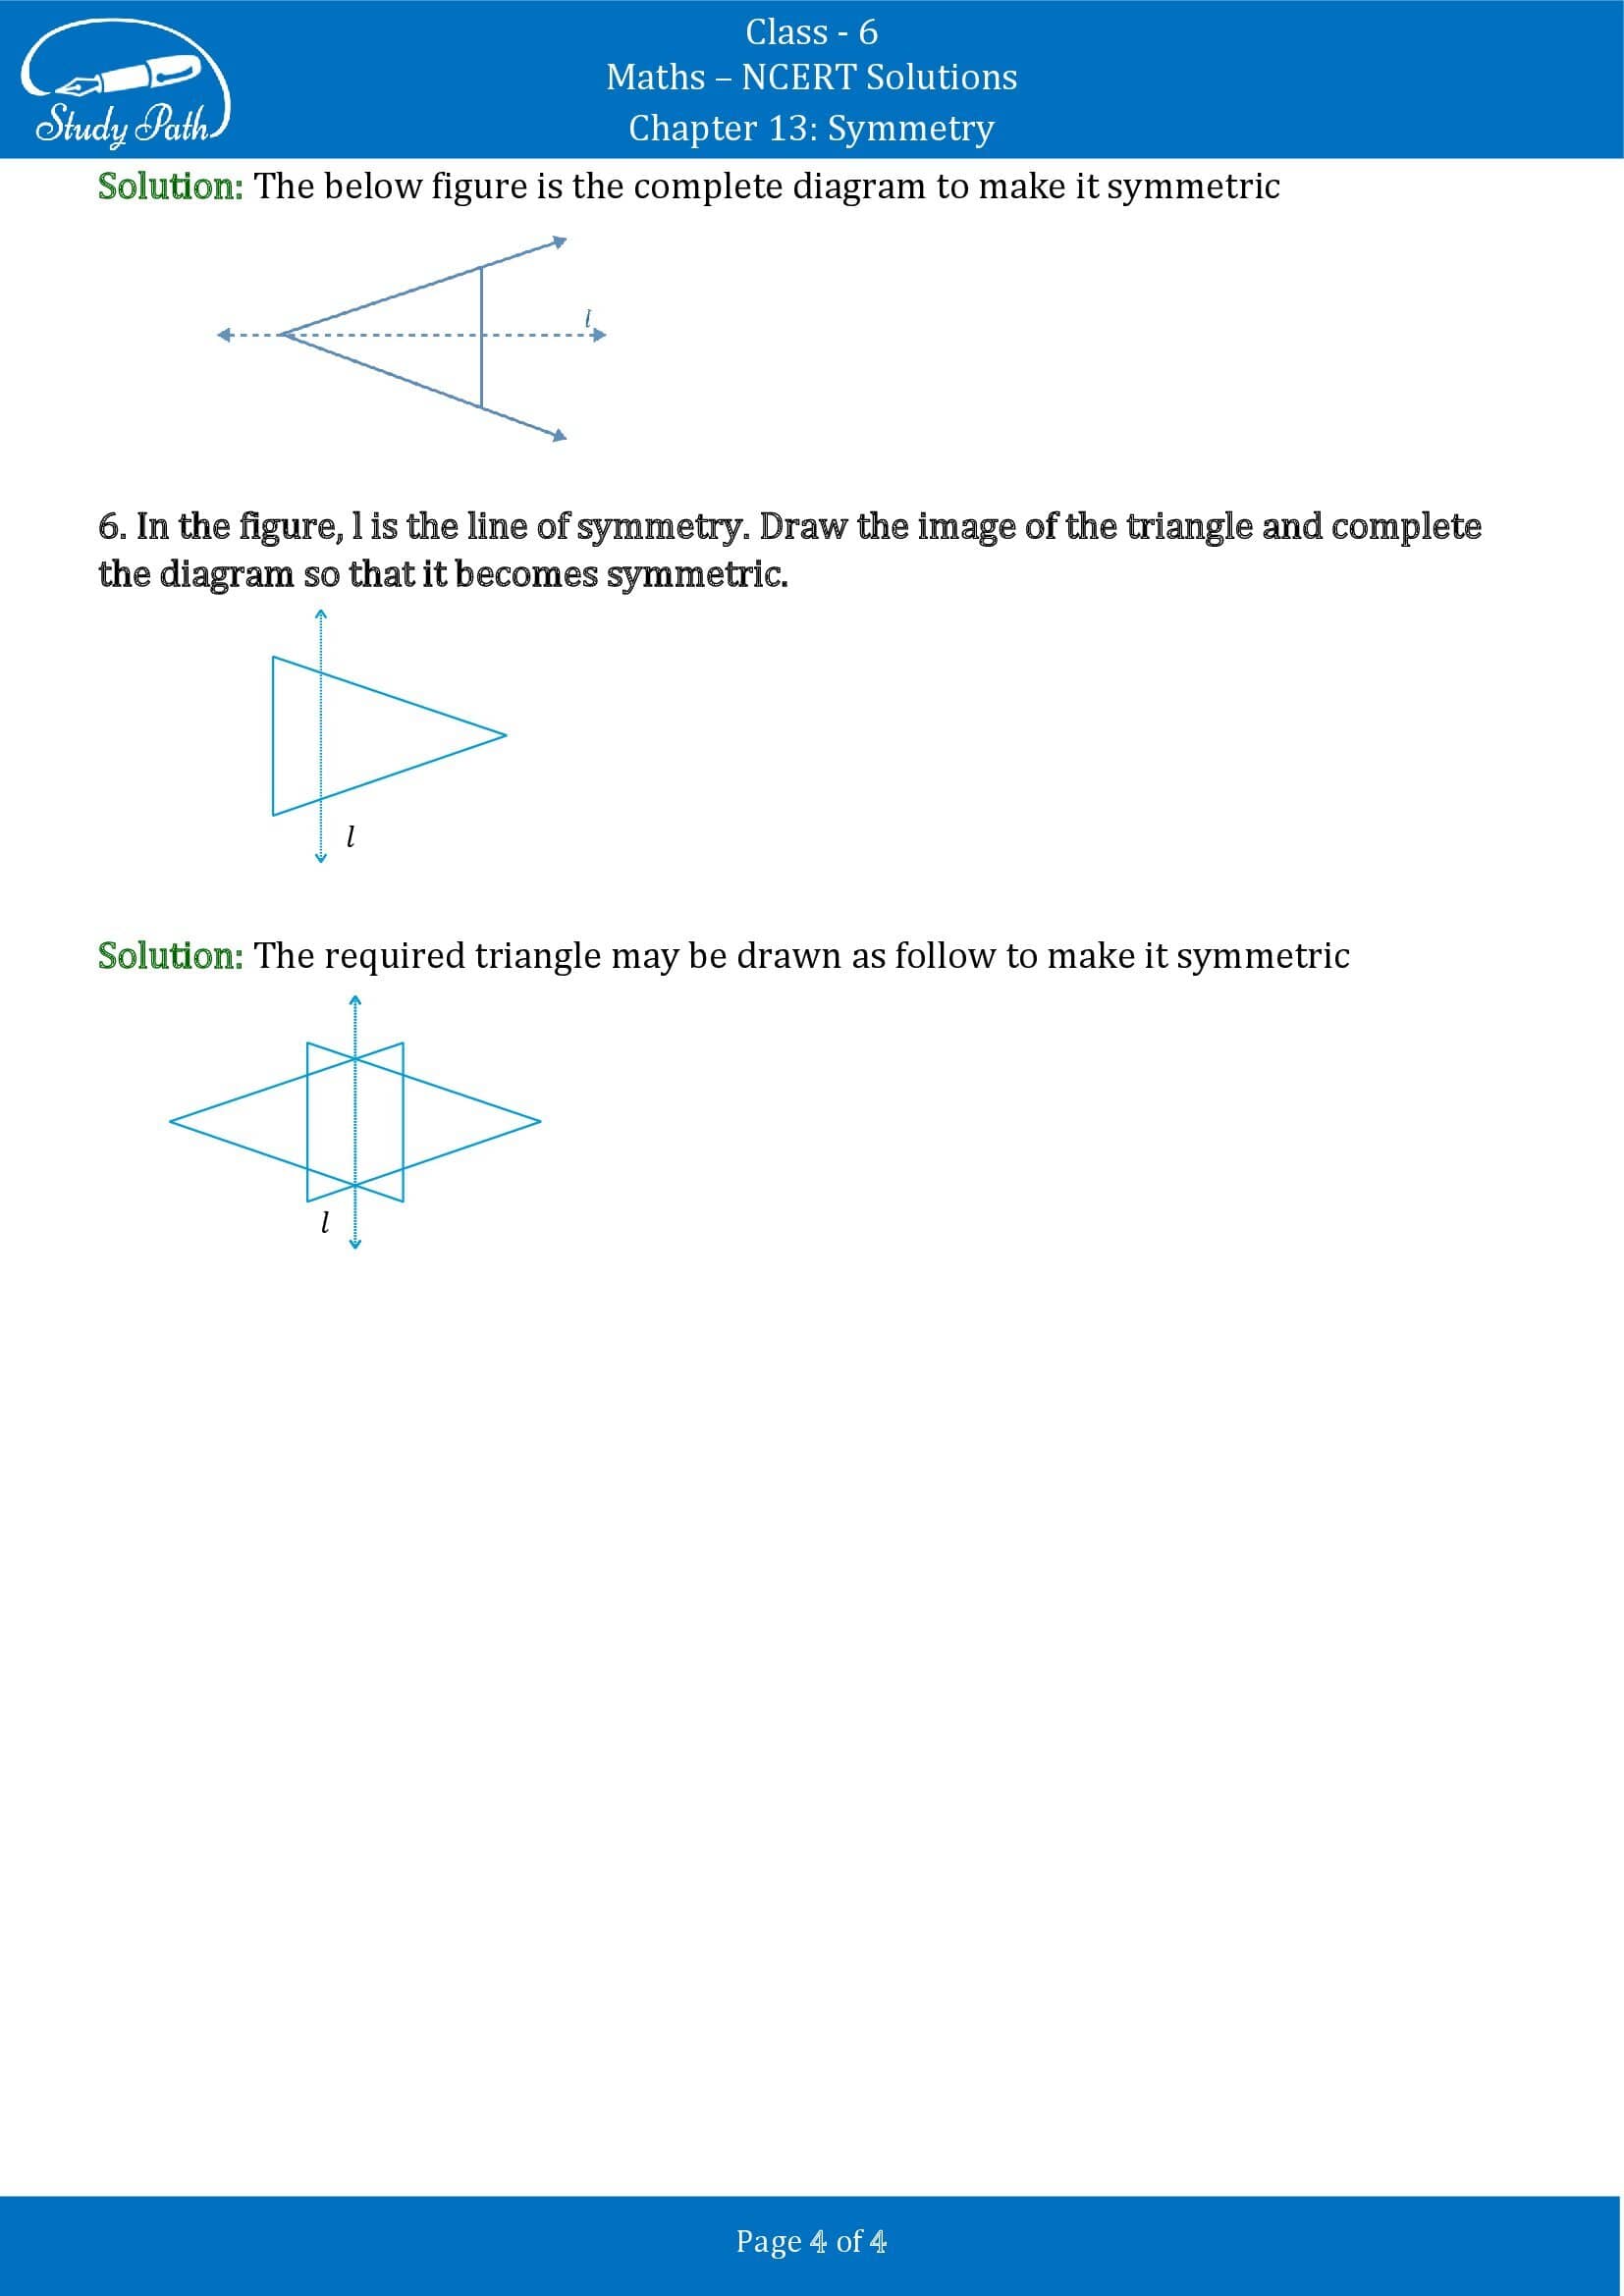 NCERT Solutions for Class 6 Maths Chapter 13 Symmetry Exercise 13.1 00004